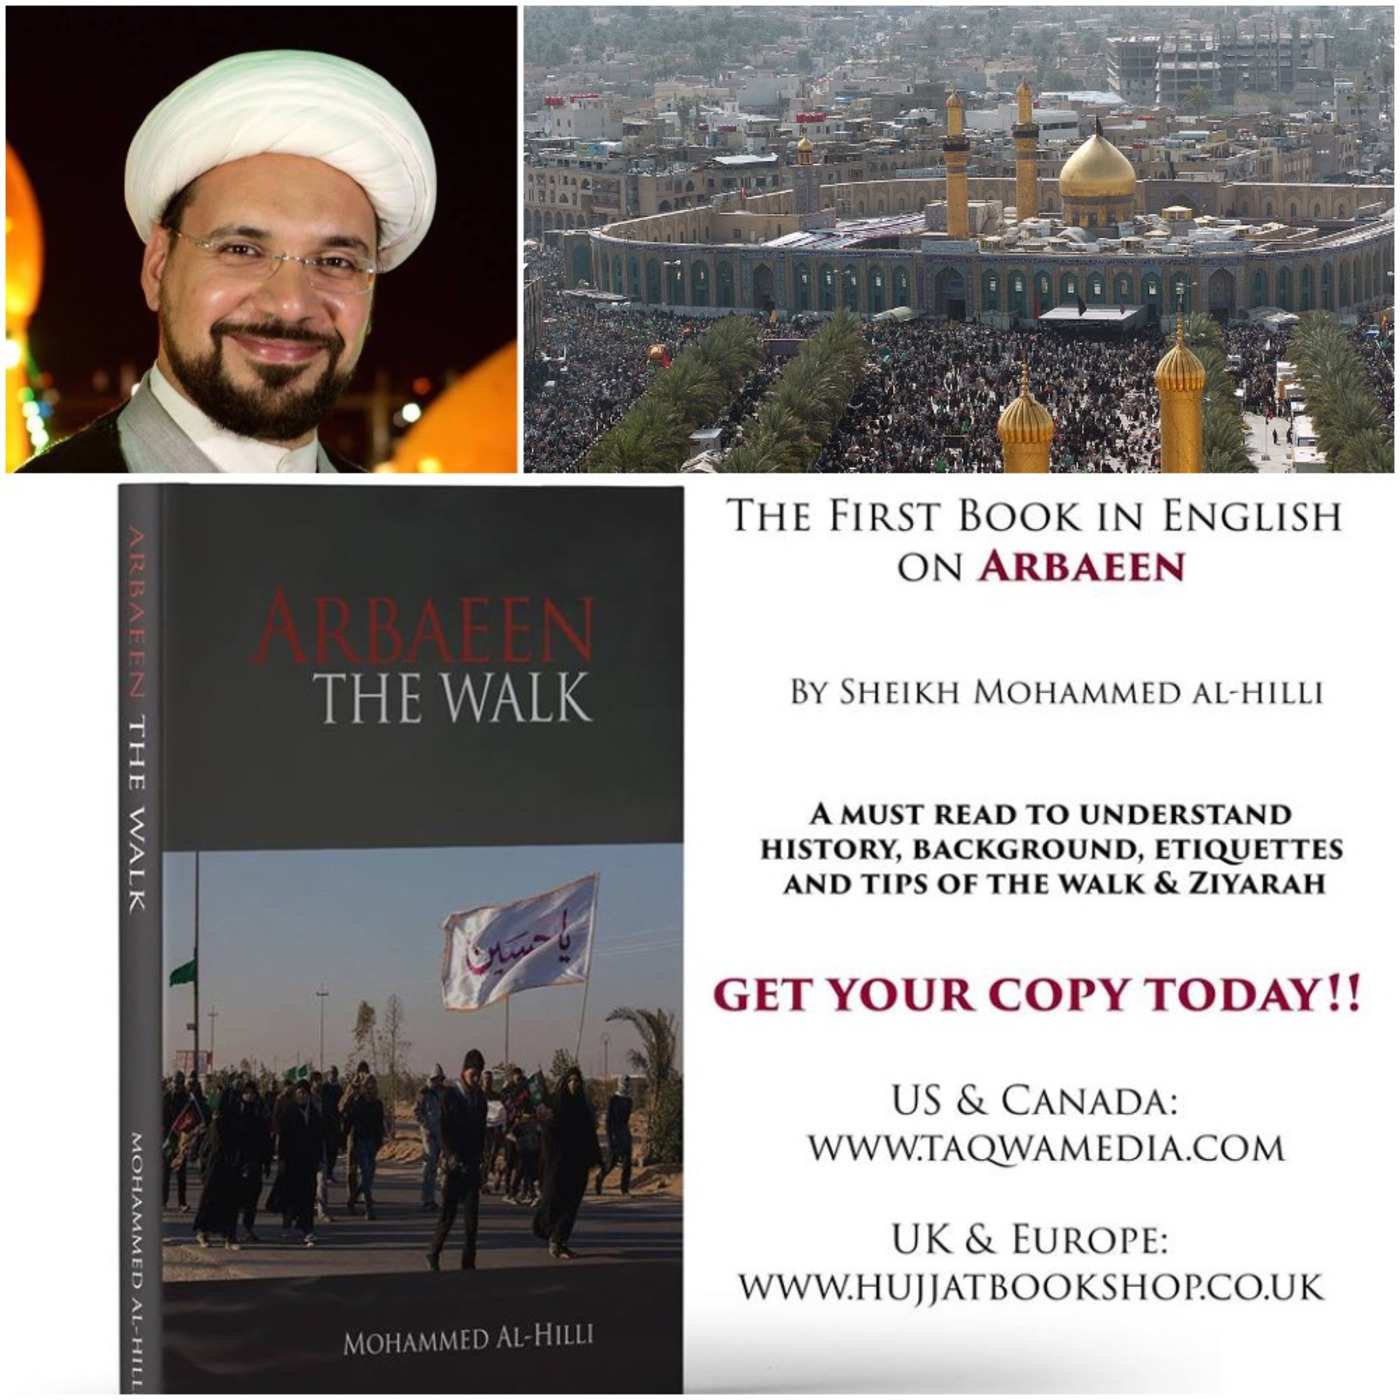 Arbaeen, The Walk: A Conversation with Sheikh Mohammed Al-Hilli